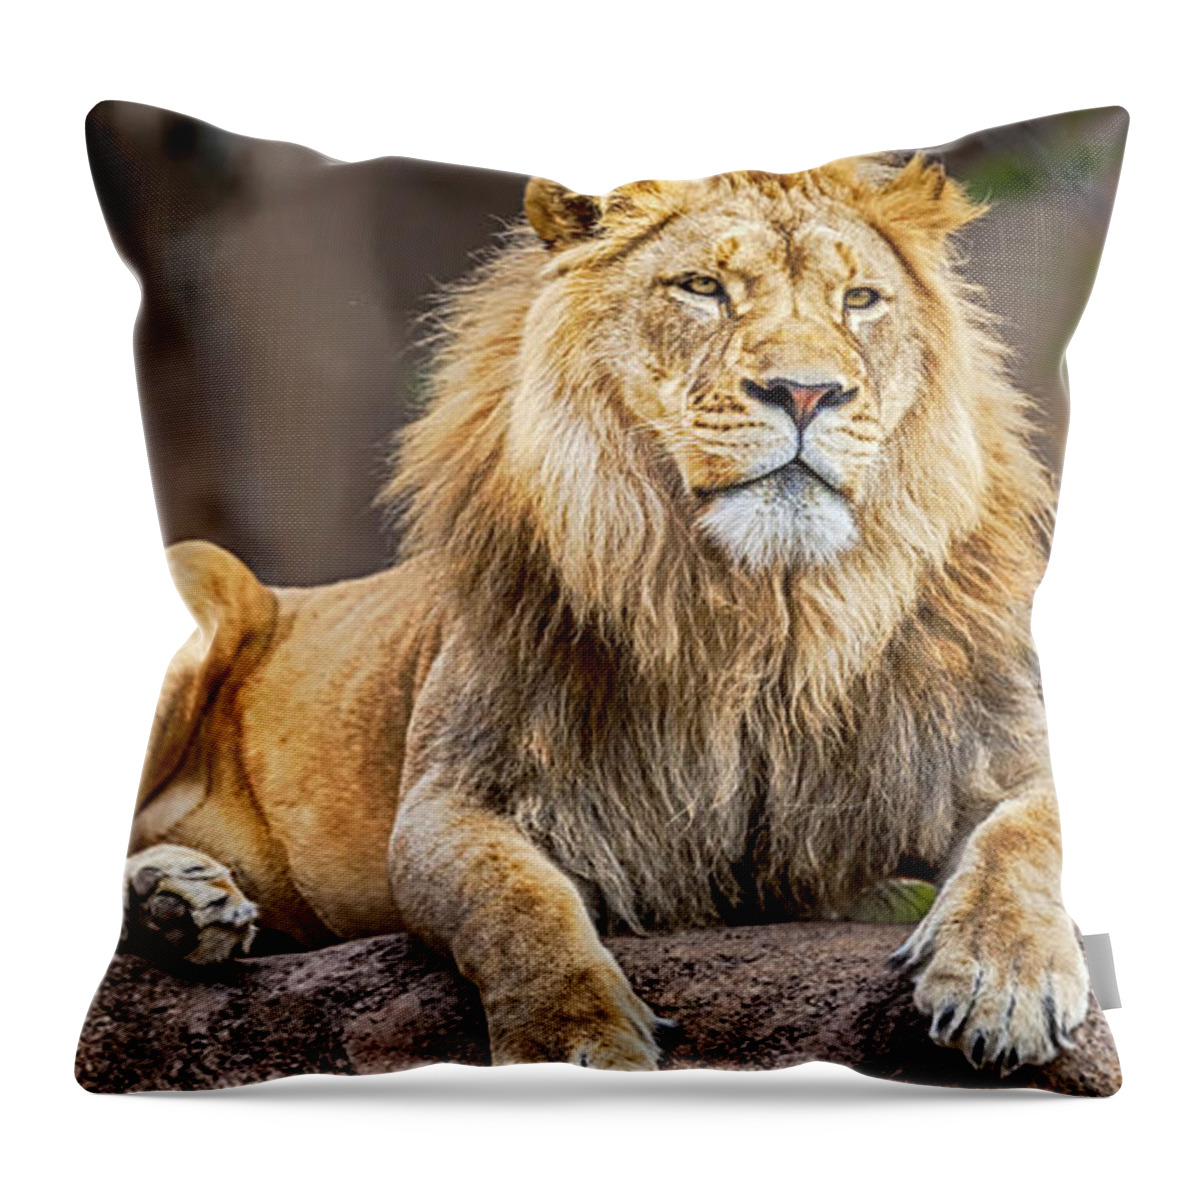 Lion Throw Pillow featuring the photograph Once upon a time by David Millenheft